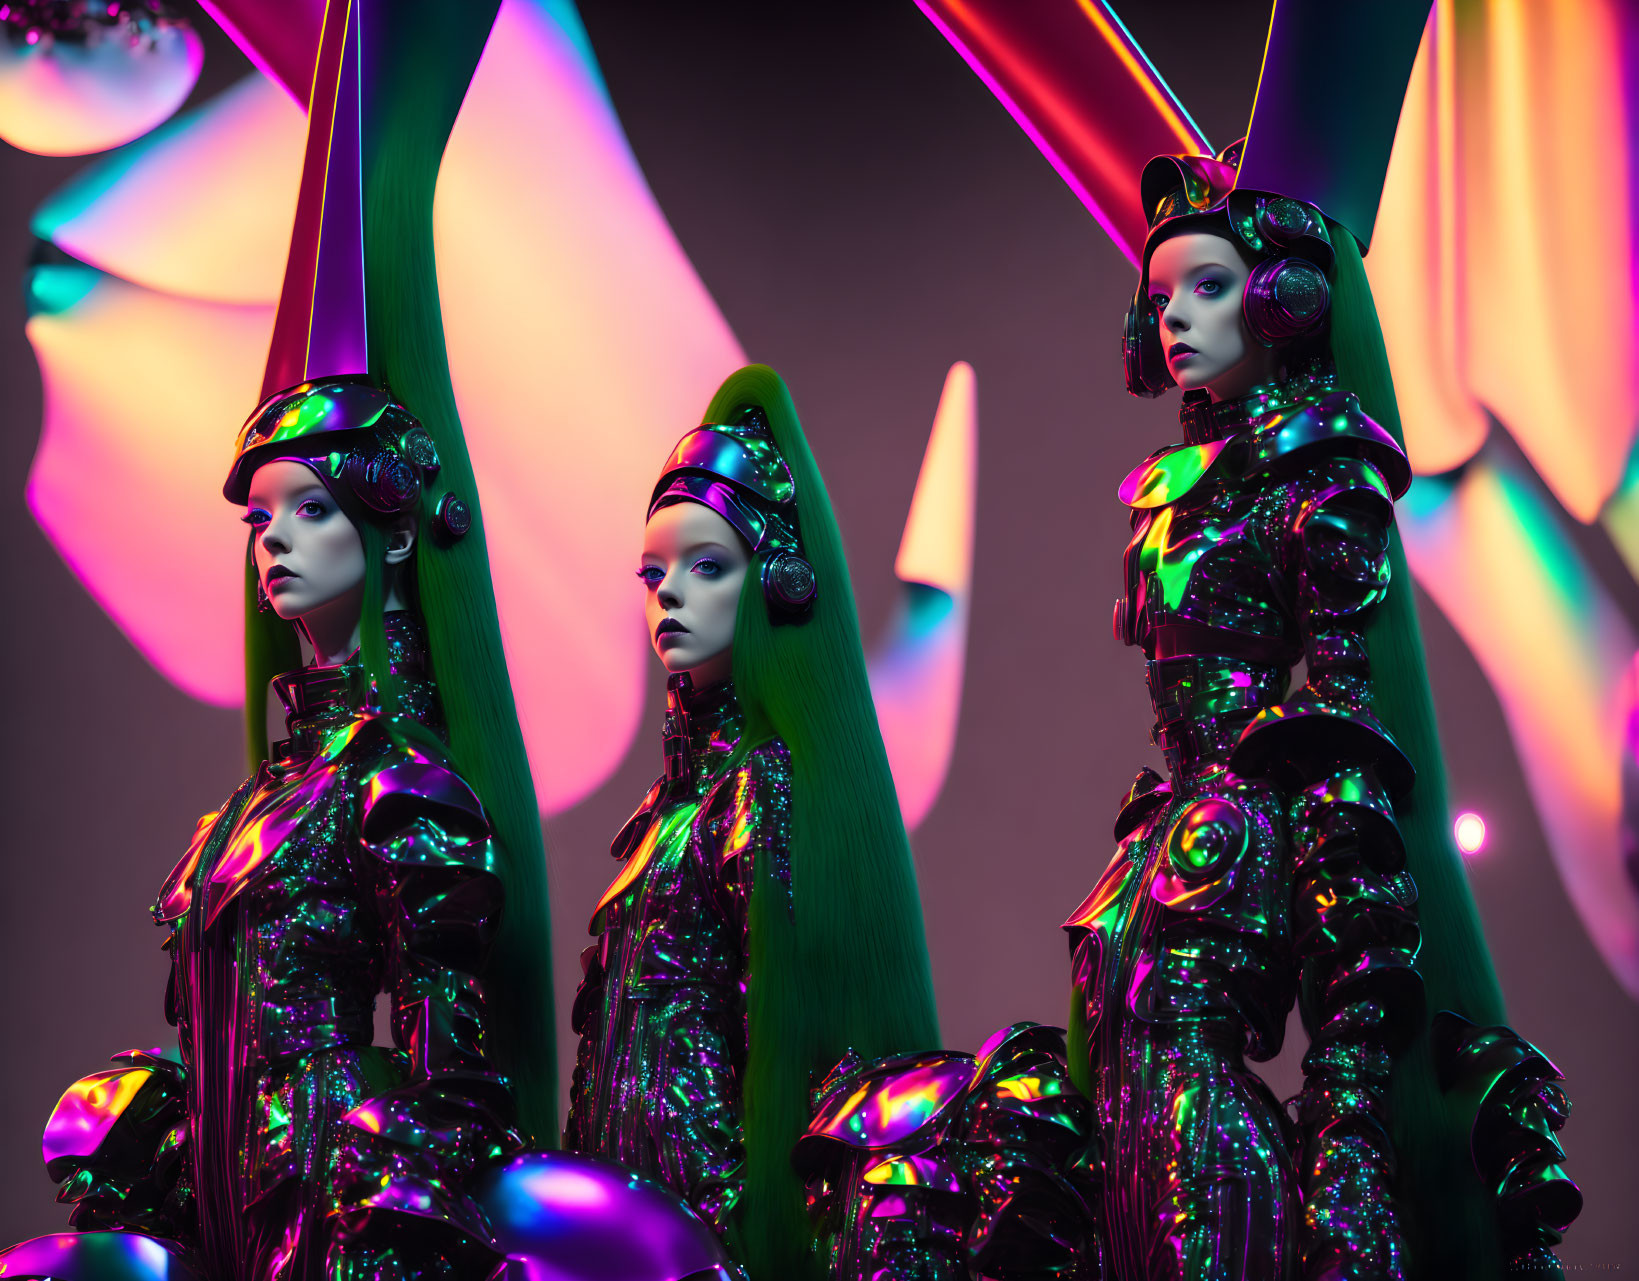 Futuristic mannequins with green hair in metallic armor against abstract backdrop